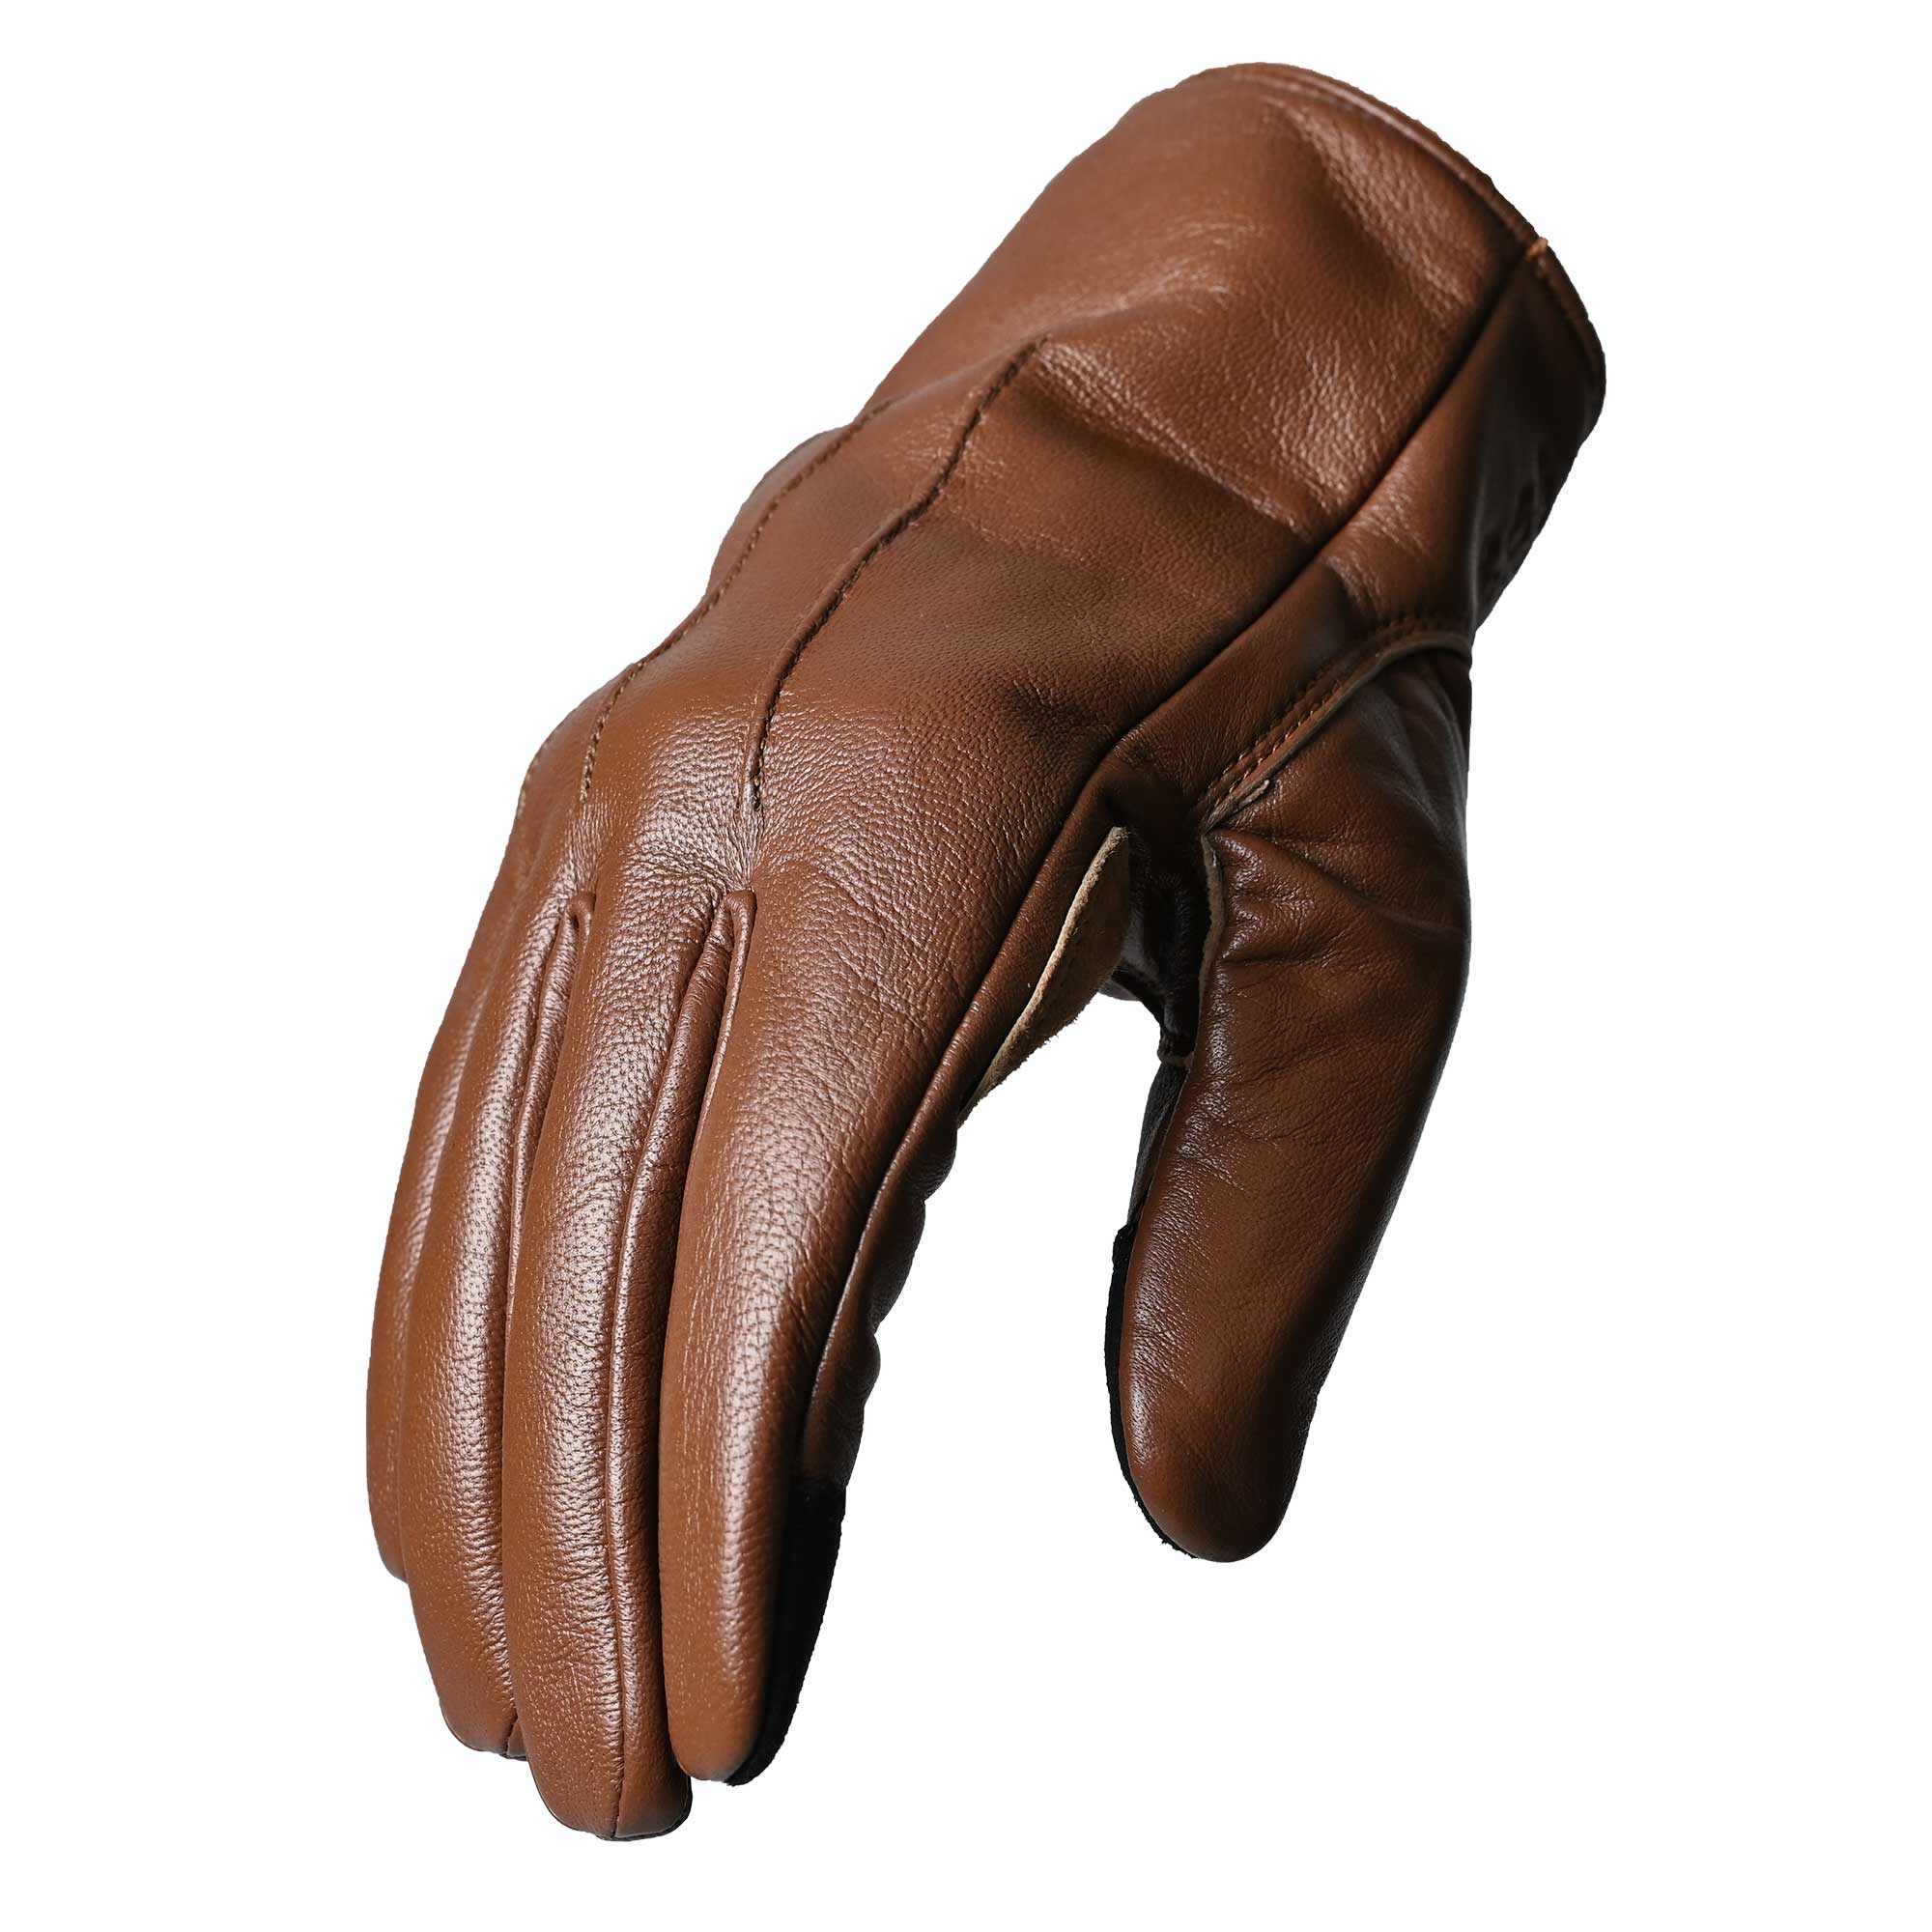 RIDEZ CLASSIC MOTO GLOVES Motorcycle Gloves BROWN RLG77 